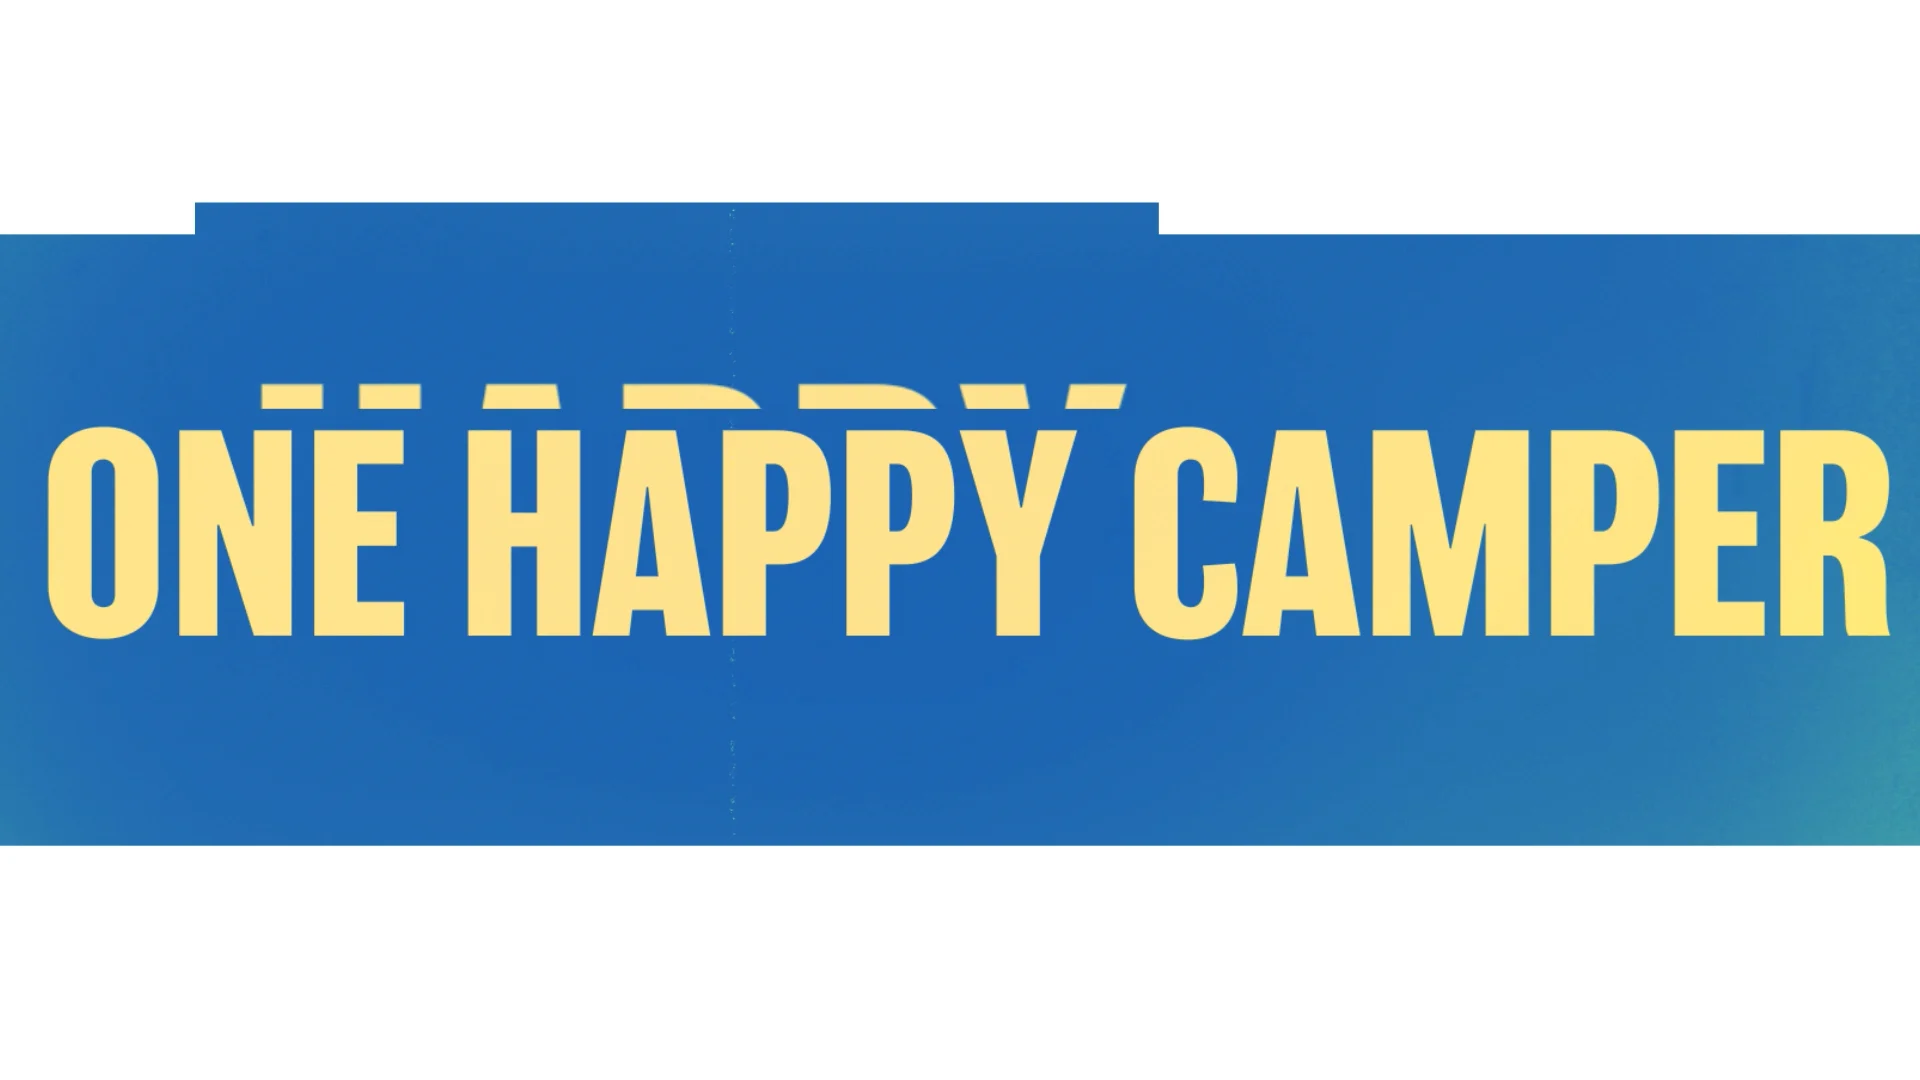 Happy Camper (words only)